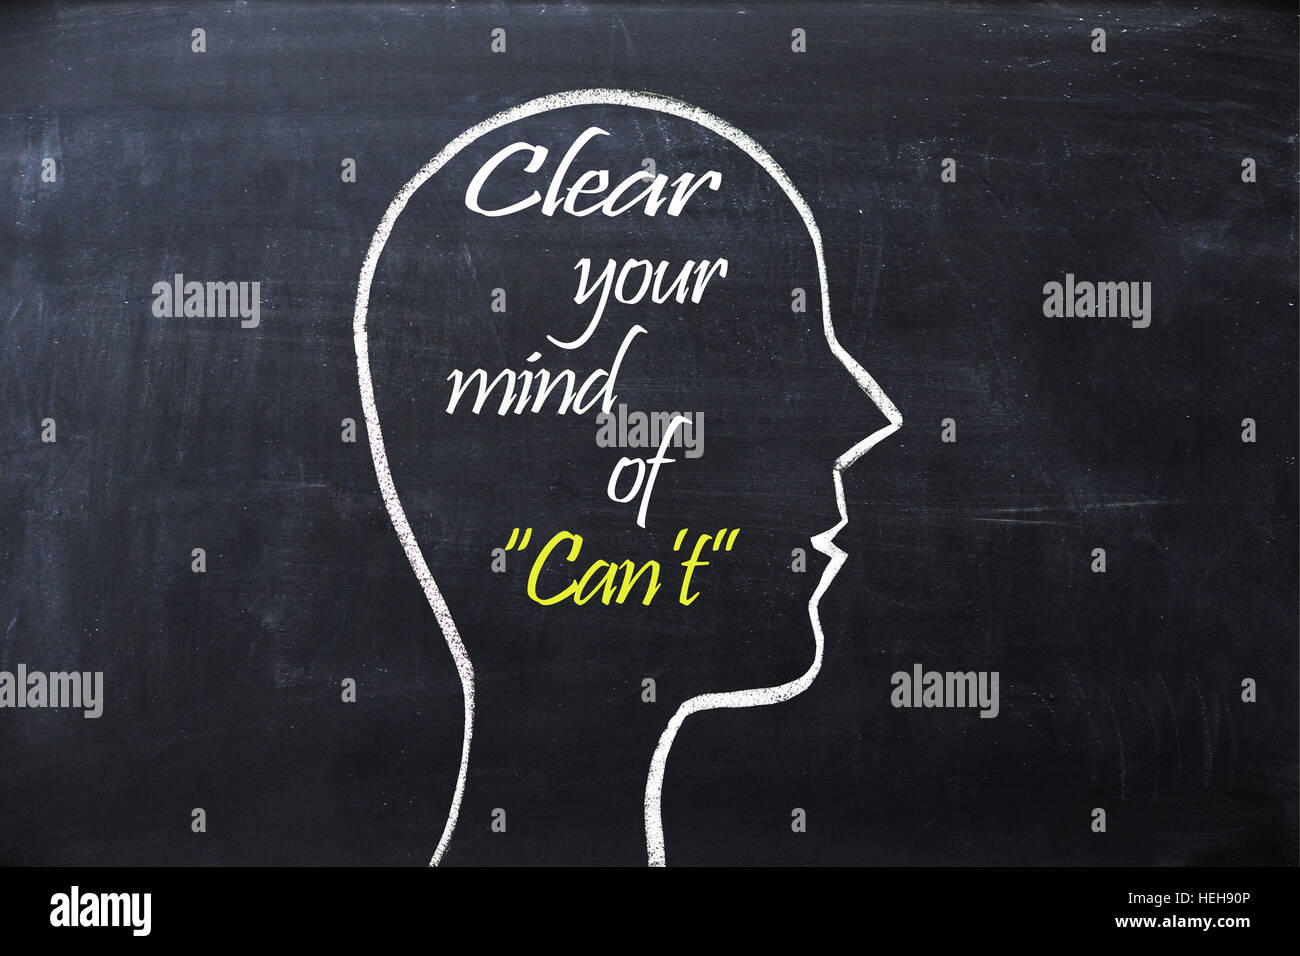 Clear your mind of can't phrase inside human head shape drawn on chalkboard Stock Photo